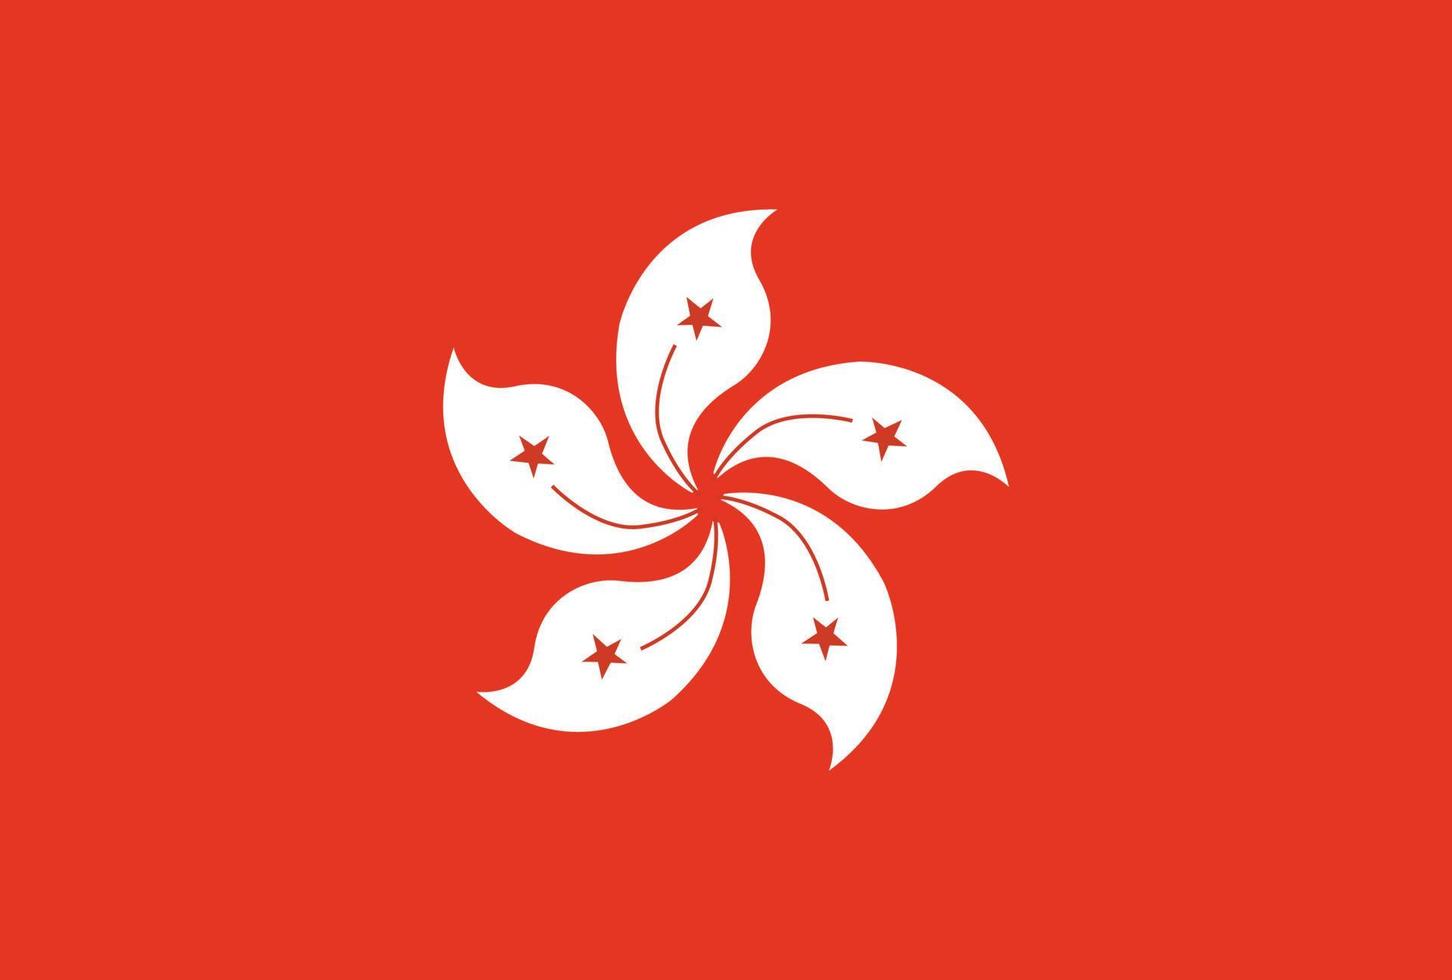 Hong Kong flag vector icon in official color and proportion correctly